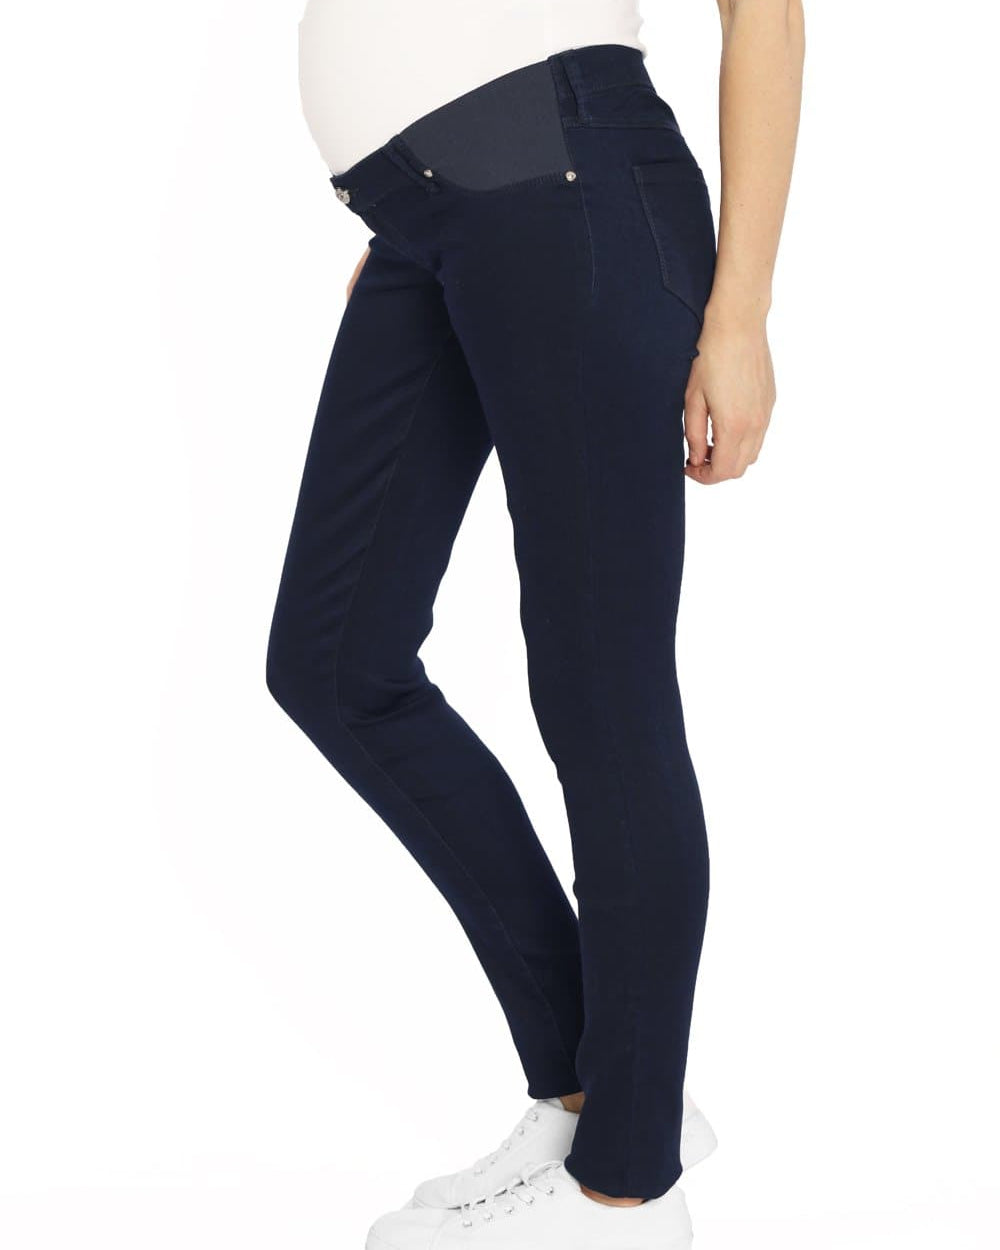 Maternity Comfortable Stretch Slim Jeans in Navy maternity jeans (1568957038695)